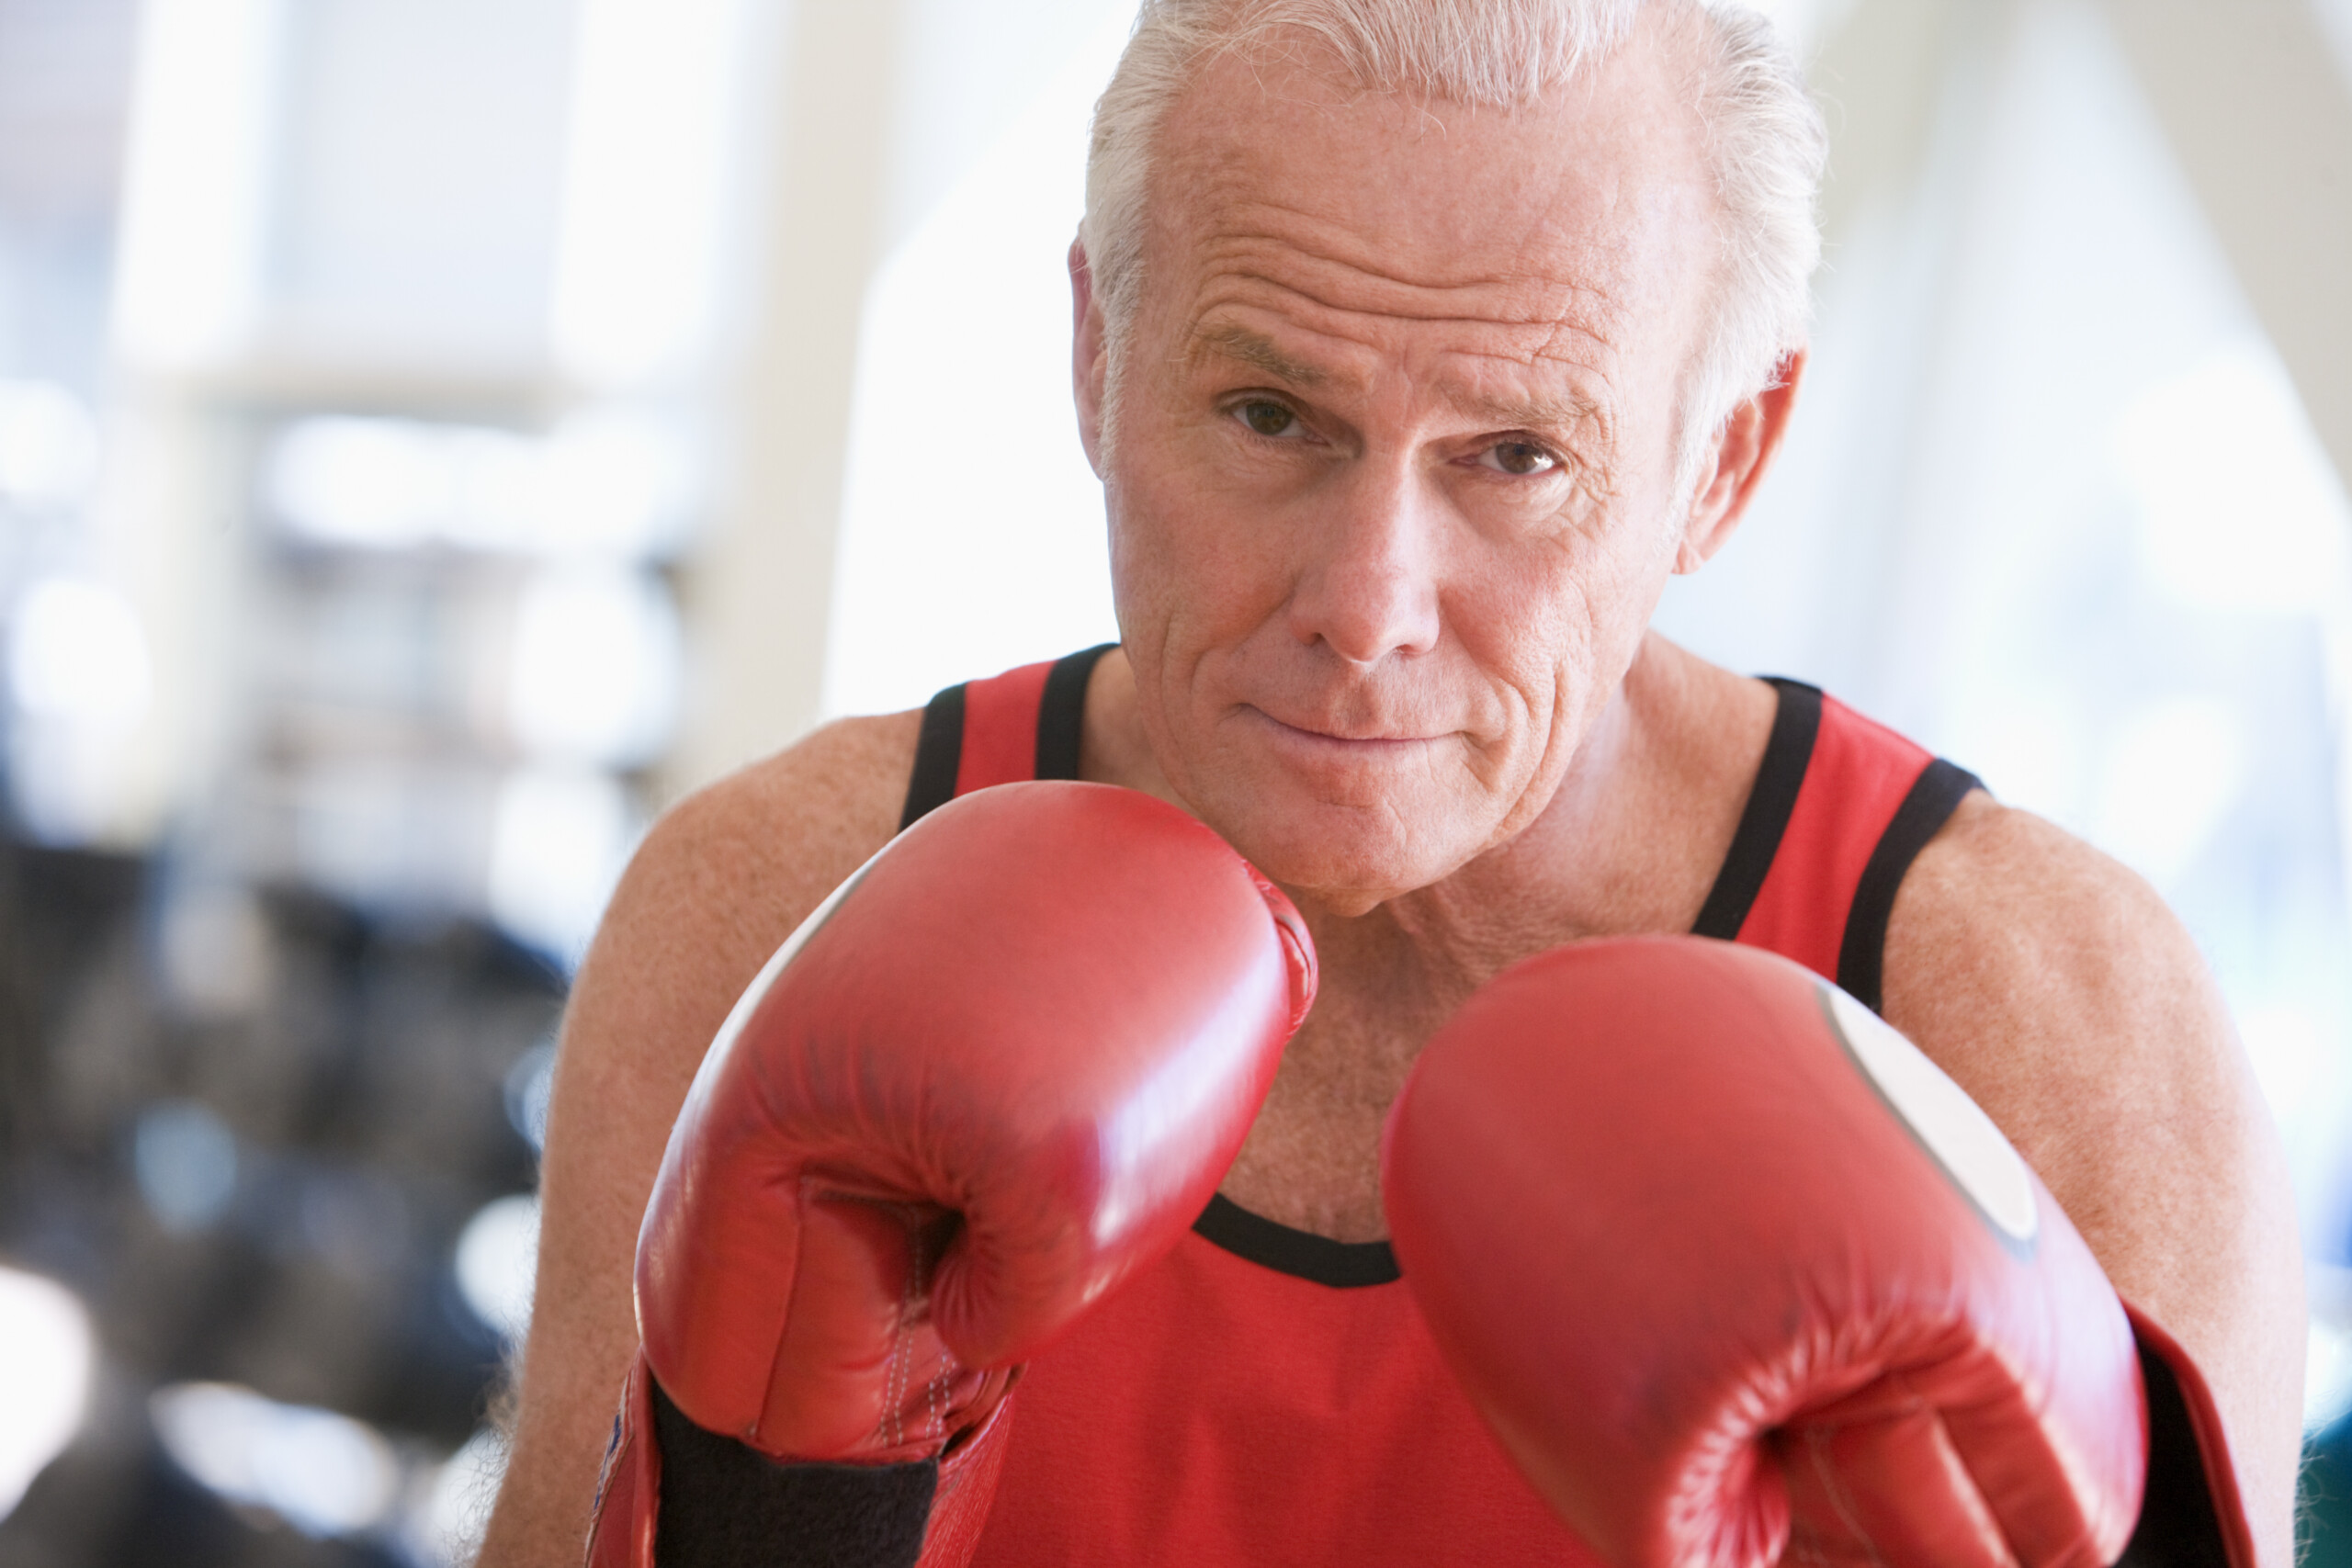 Does Punching a Heavy Bag Count As Aerobic Exercise?